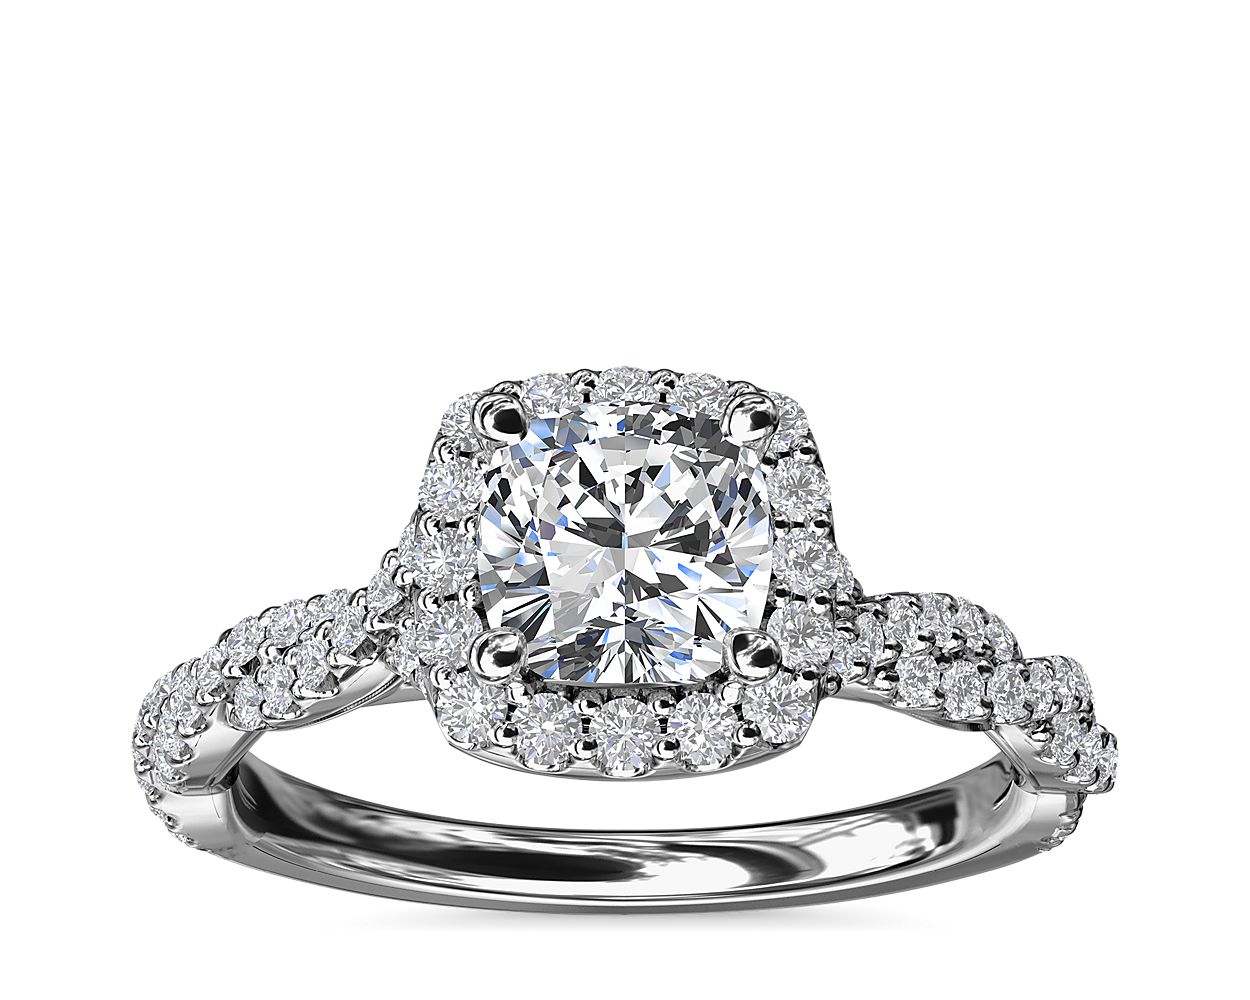 Twisted Band Halo Diamond Engagement Ring in (1/3 ct. tw.) 1.31 Carat G-VVS2 Cushion Modified Cut Diamond